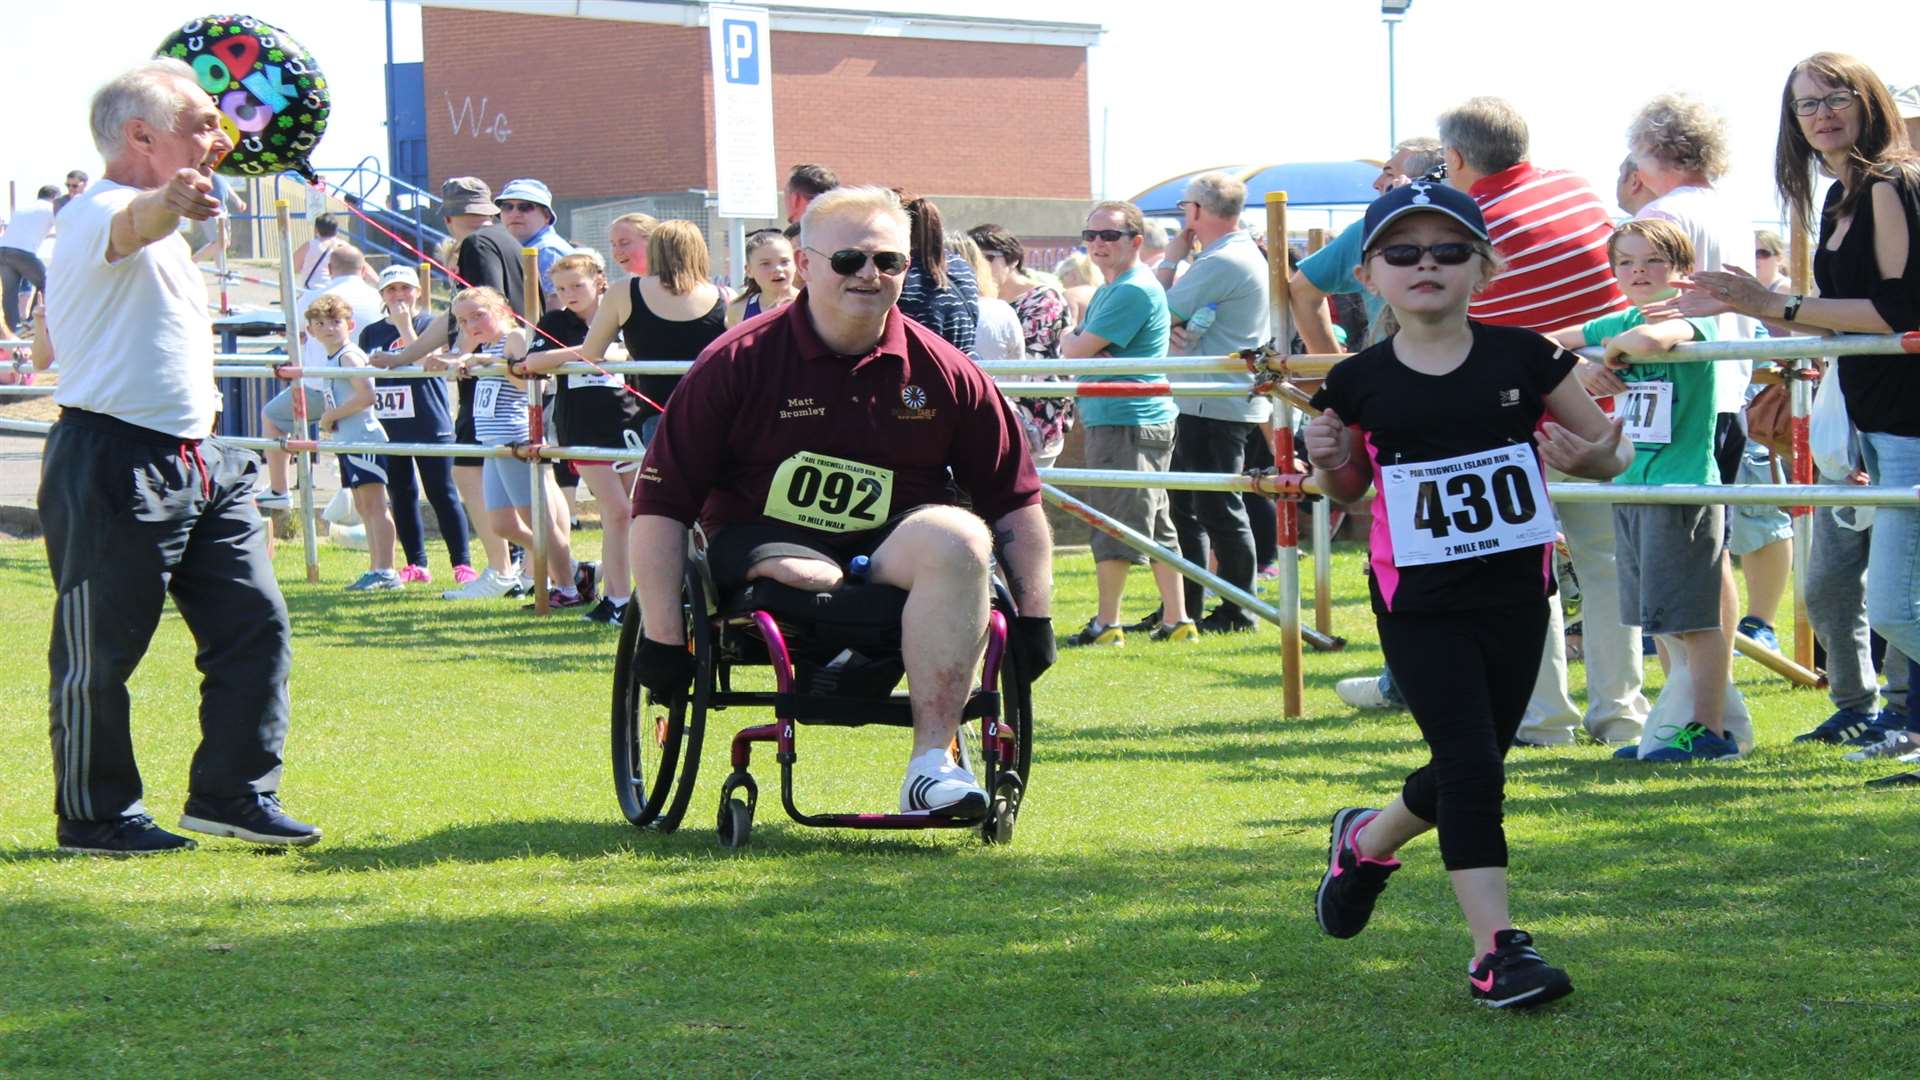 Matt Bromley becomes the first person in a wheelchair to enter and complete the Paul Trigwell Sheppey Run